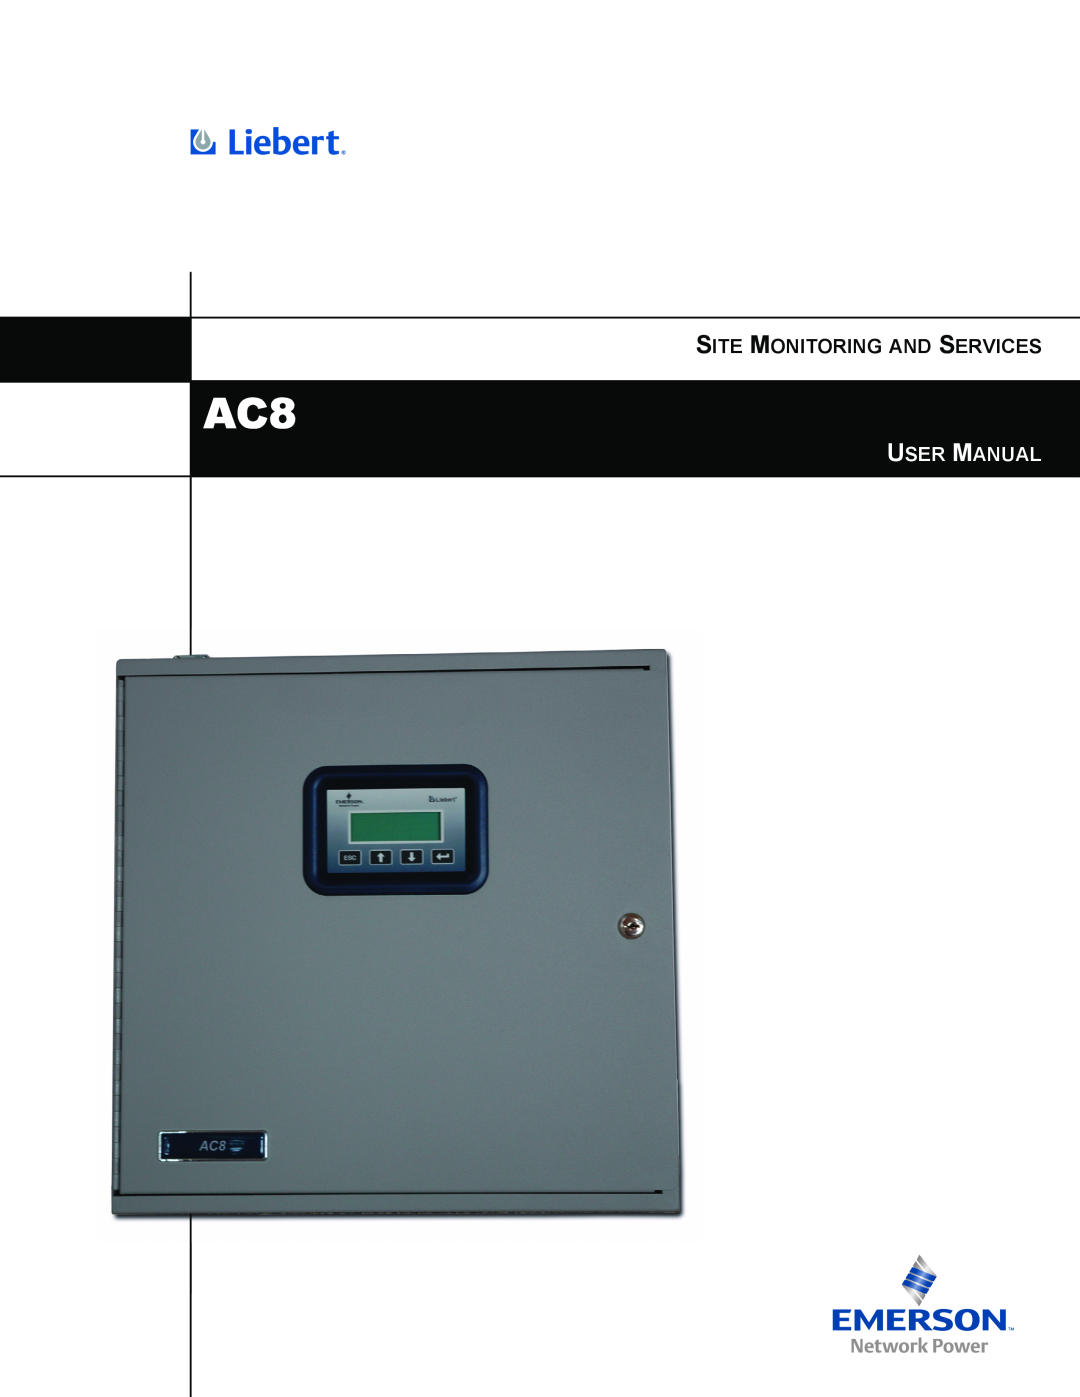 Emerson AC8 user manual Site Monitoring And Services 